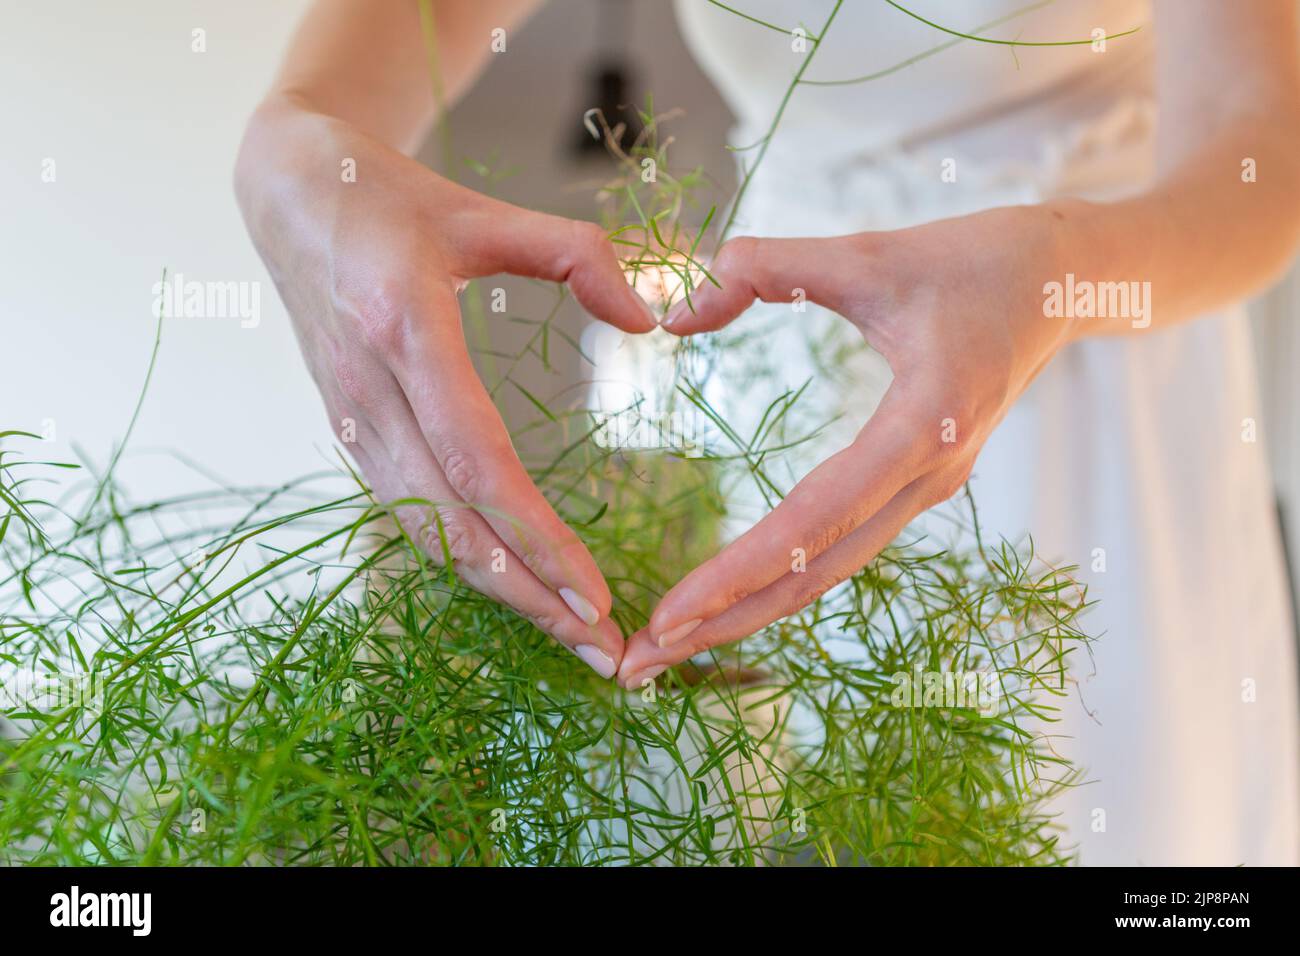 Womans hands showing heart holding asparagus leaves. Stock Photo